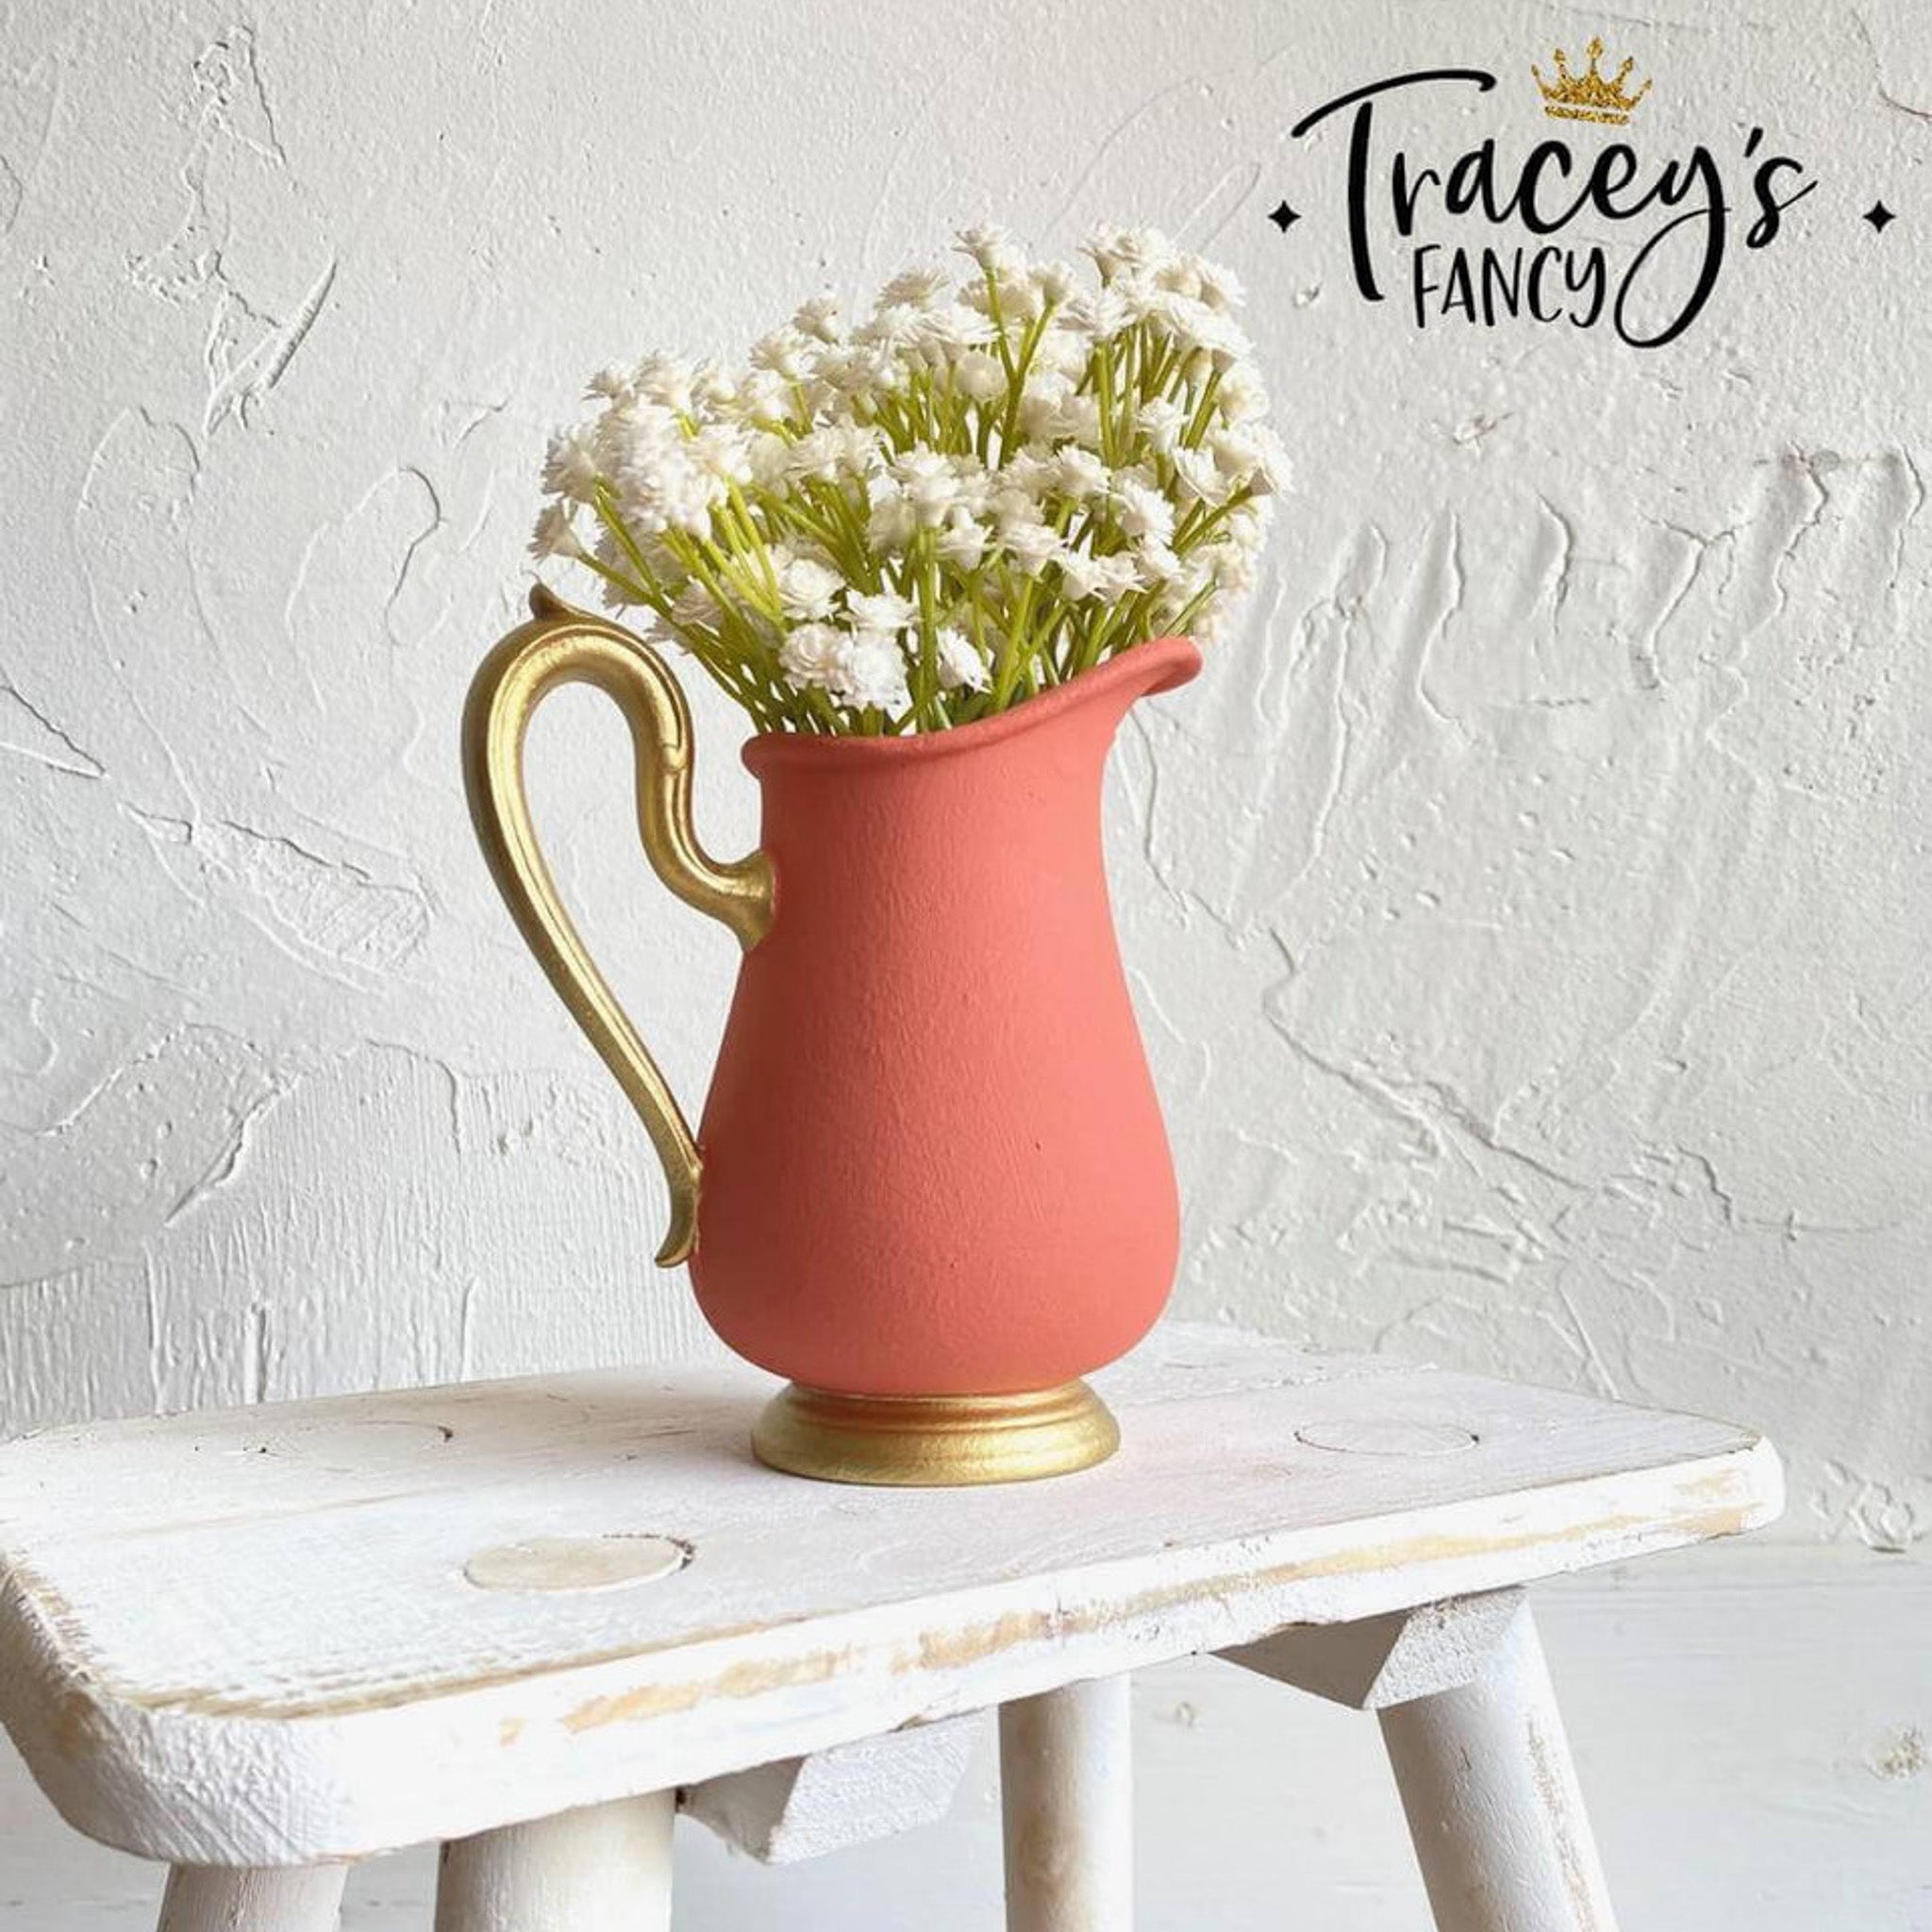 A ceramic water pitcher refurbished by Tracey's Fancy is painted with Dixie Belle's Cottage Door chalk mineral paint. The pitcher has a gold painted handle and base with white flowers coming out of the top.